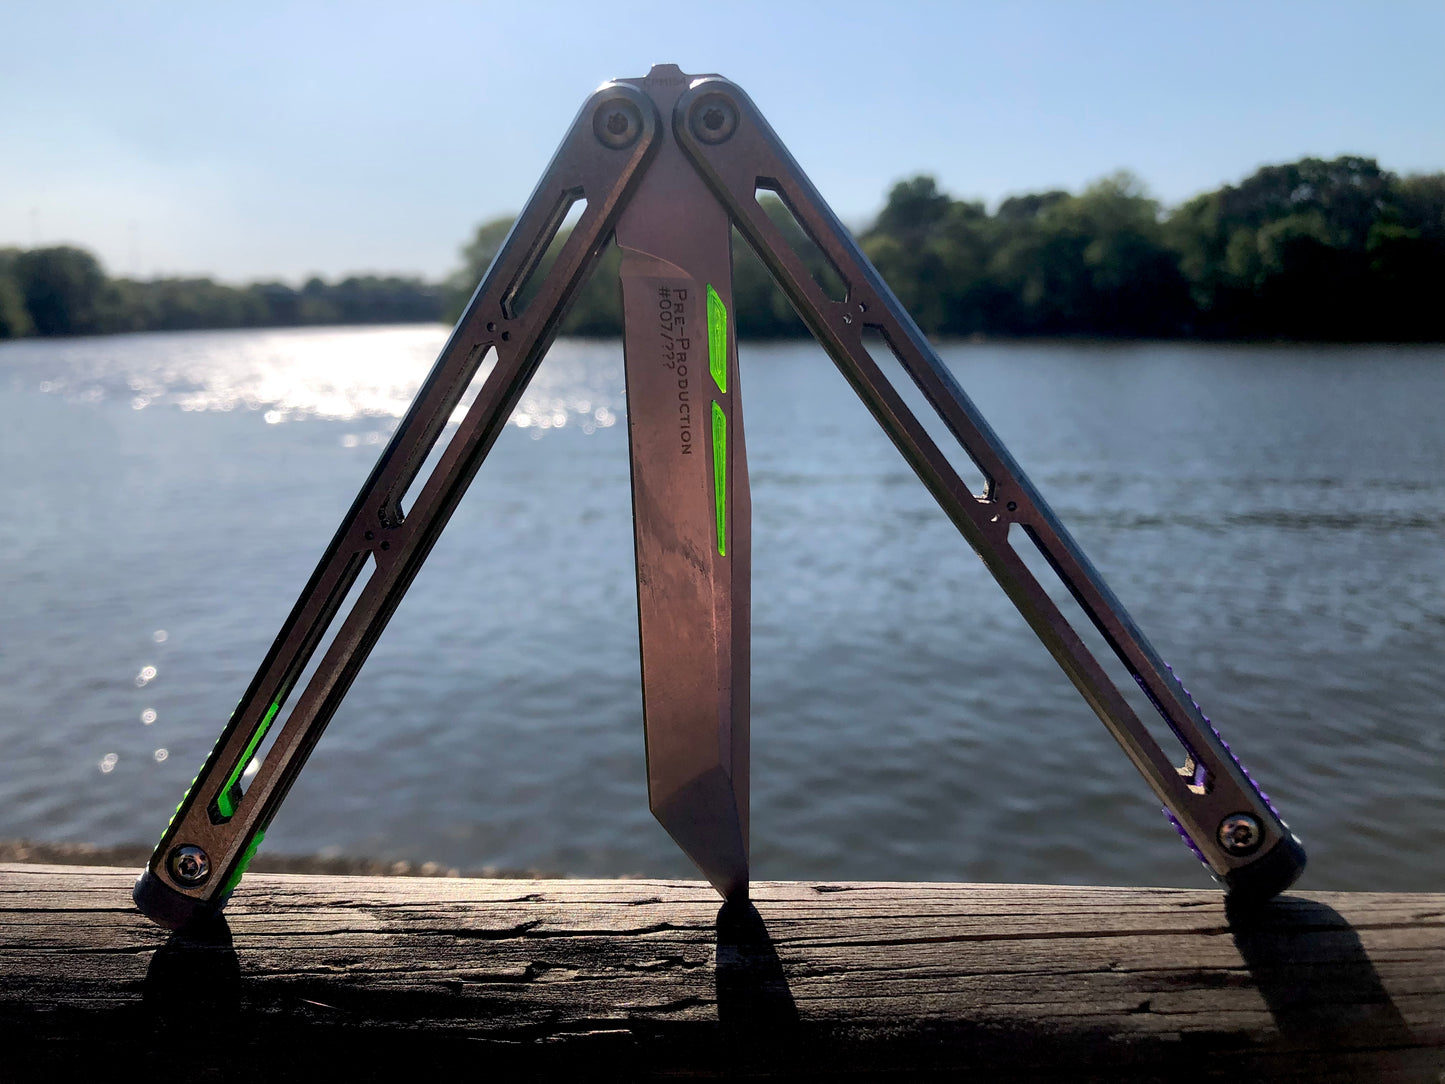 This cosmetic blade insert adds a pop of color to your Squid Industries Hydro balisong. The insert is made in-house from a shatter-proof polyurethane and installs easily with your thumb.